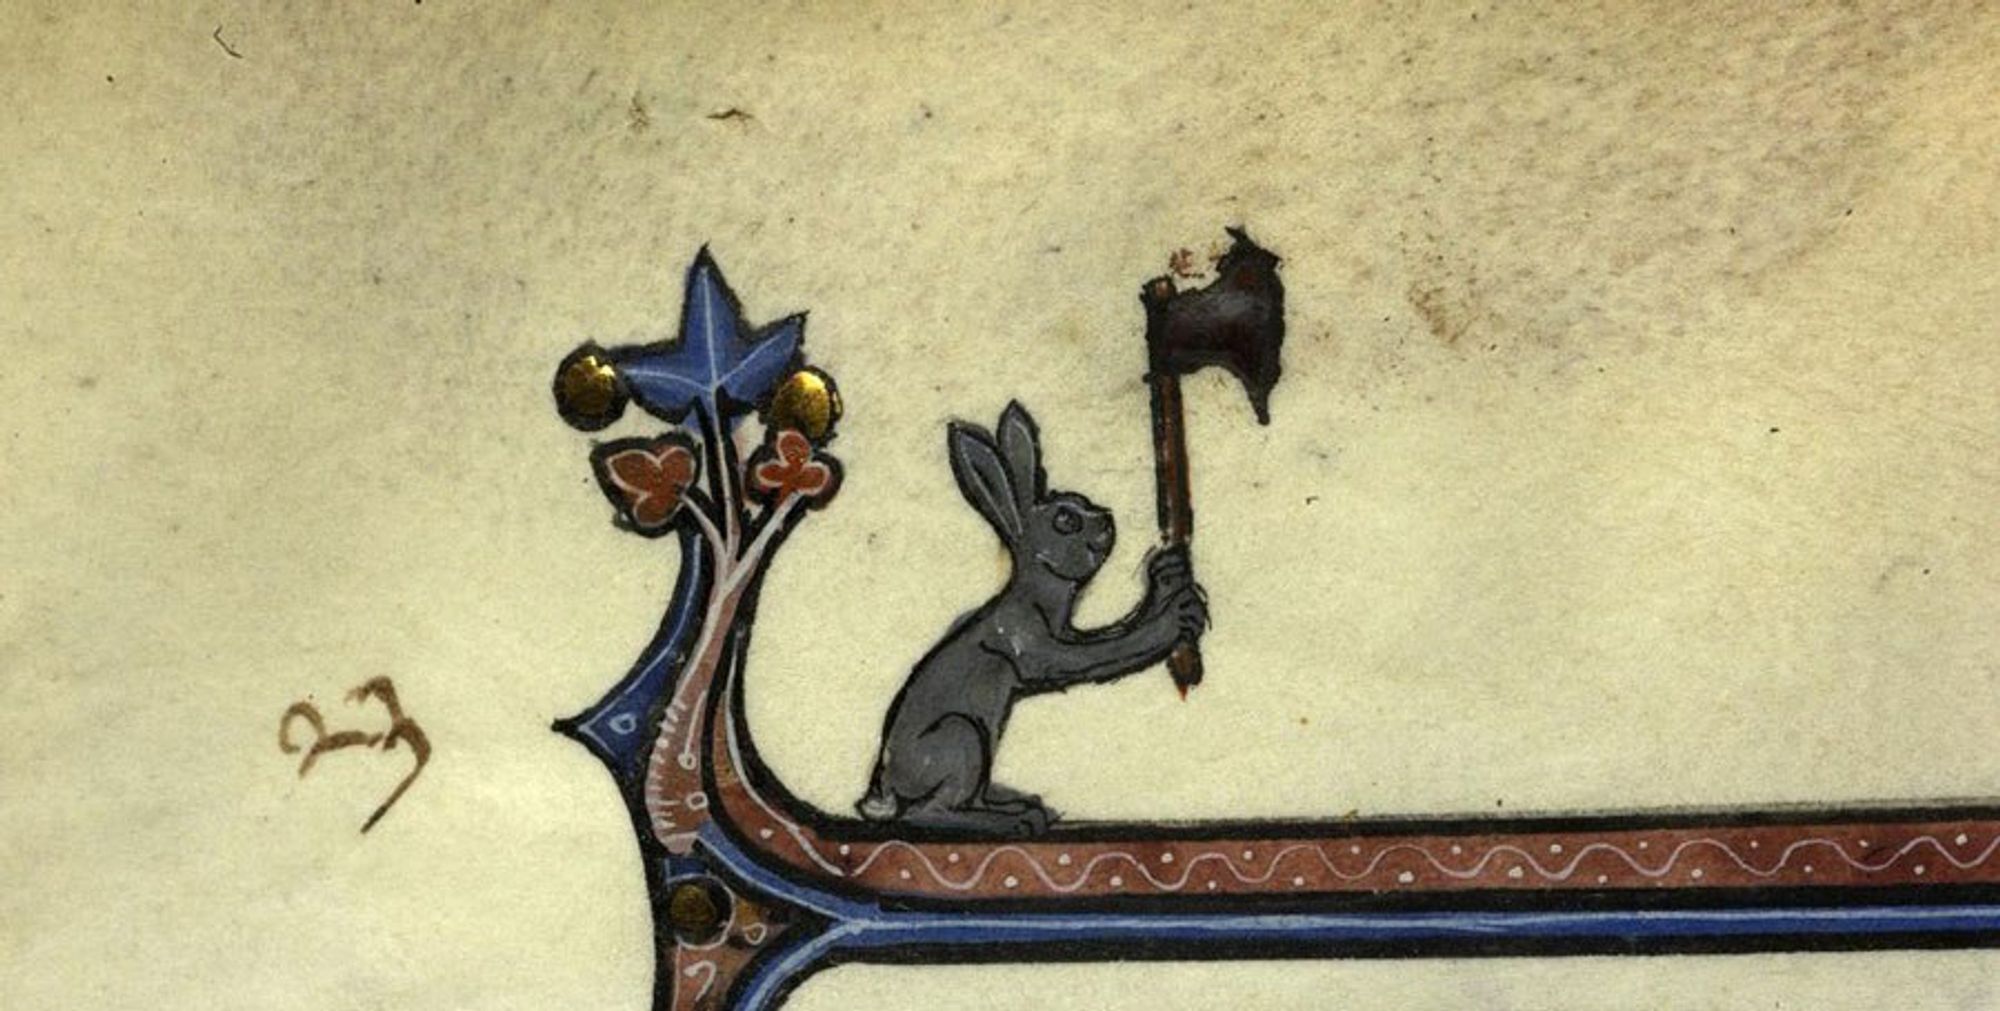 Portrait of a rabbit with an axe.